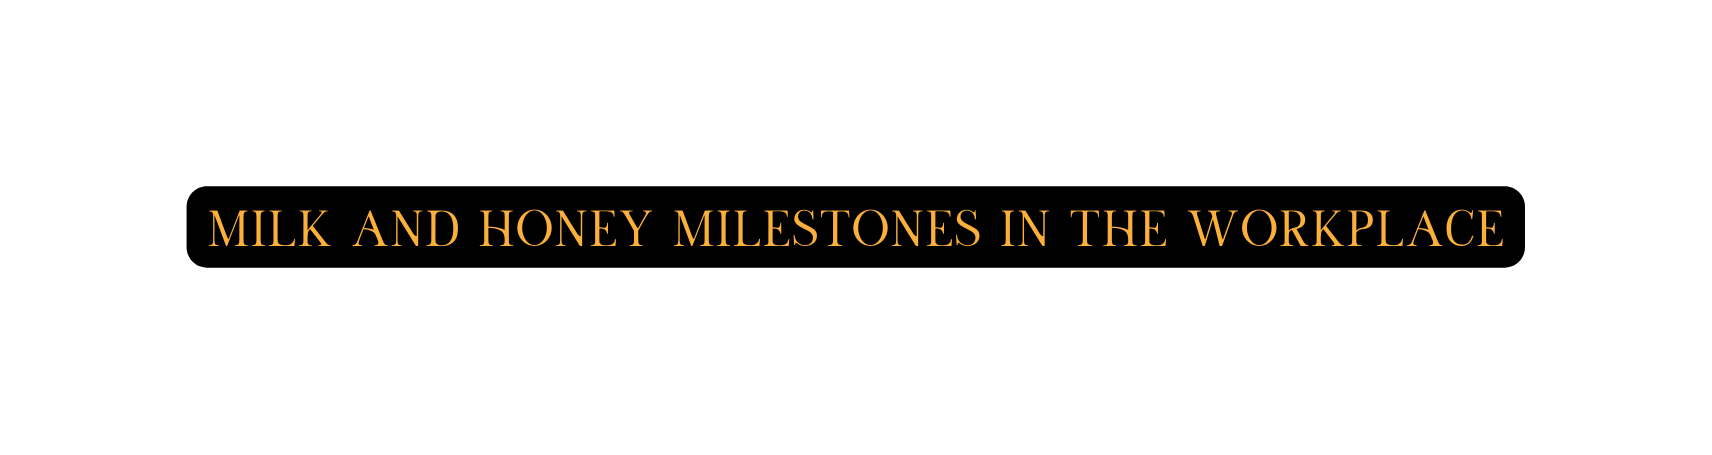 Milk and honey milestones in the workplace